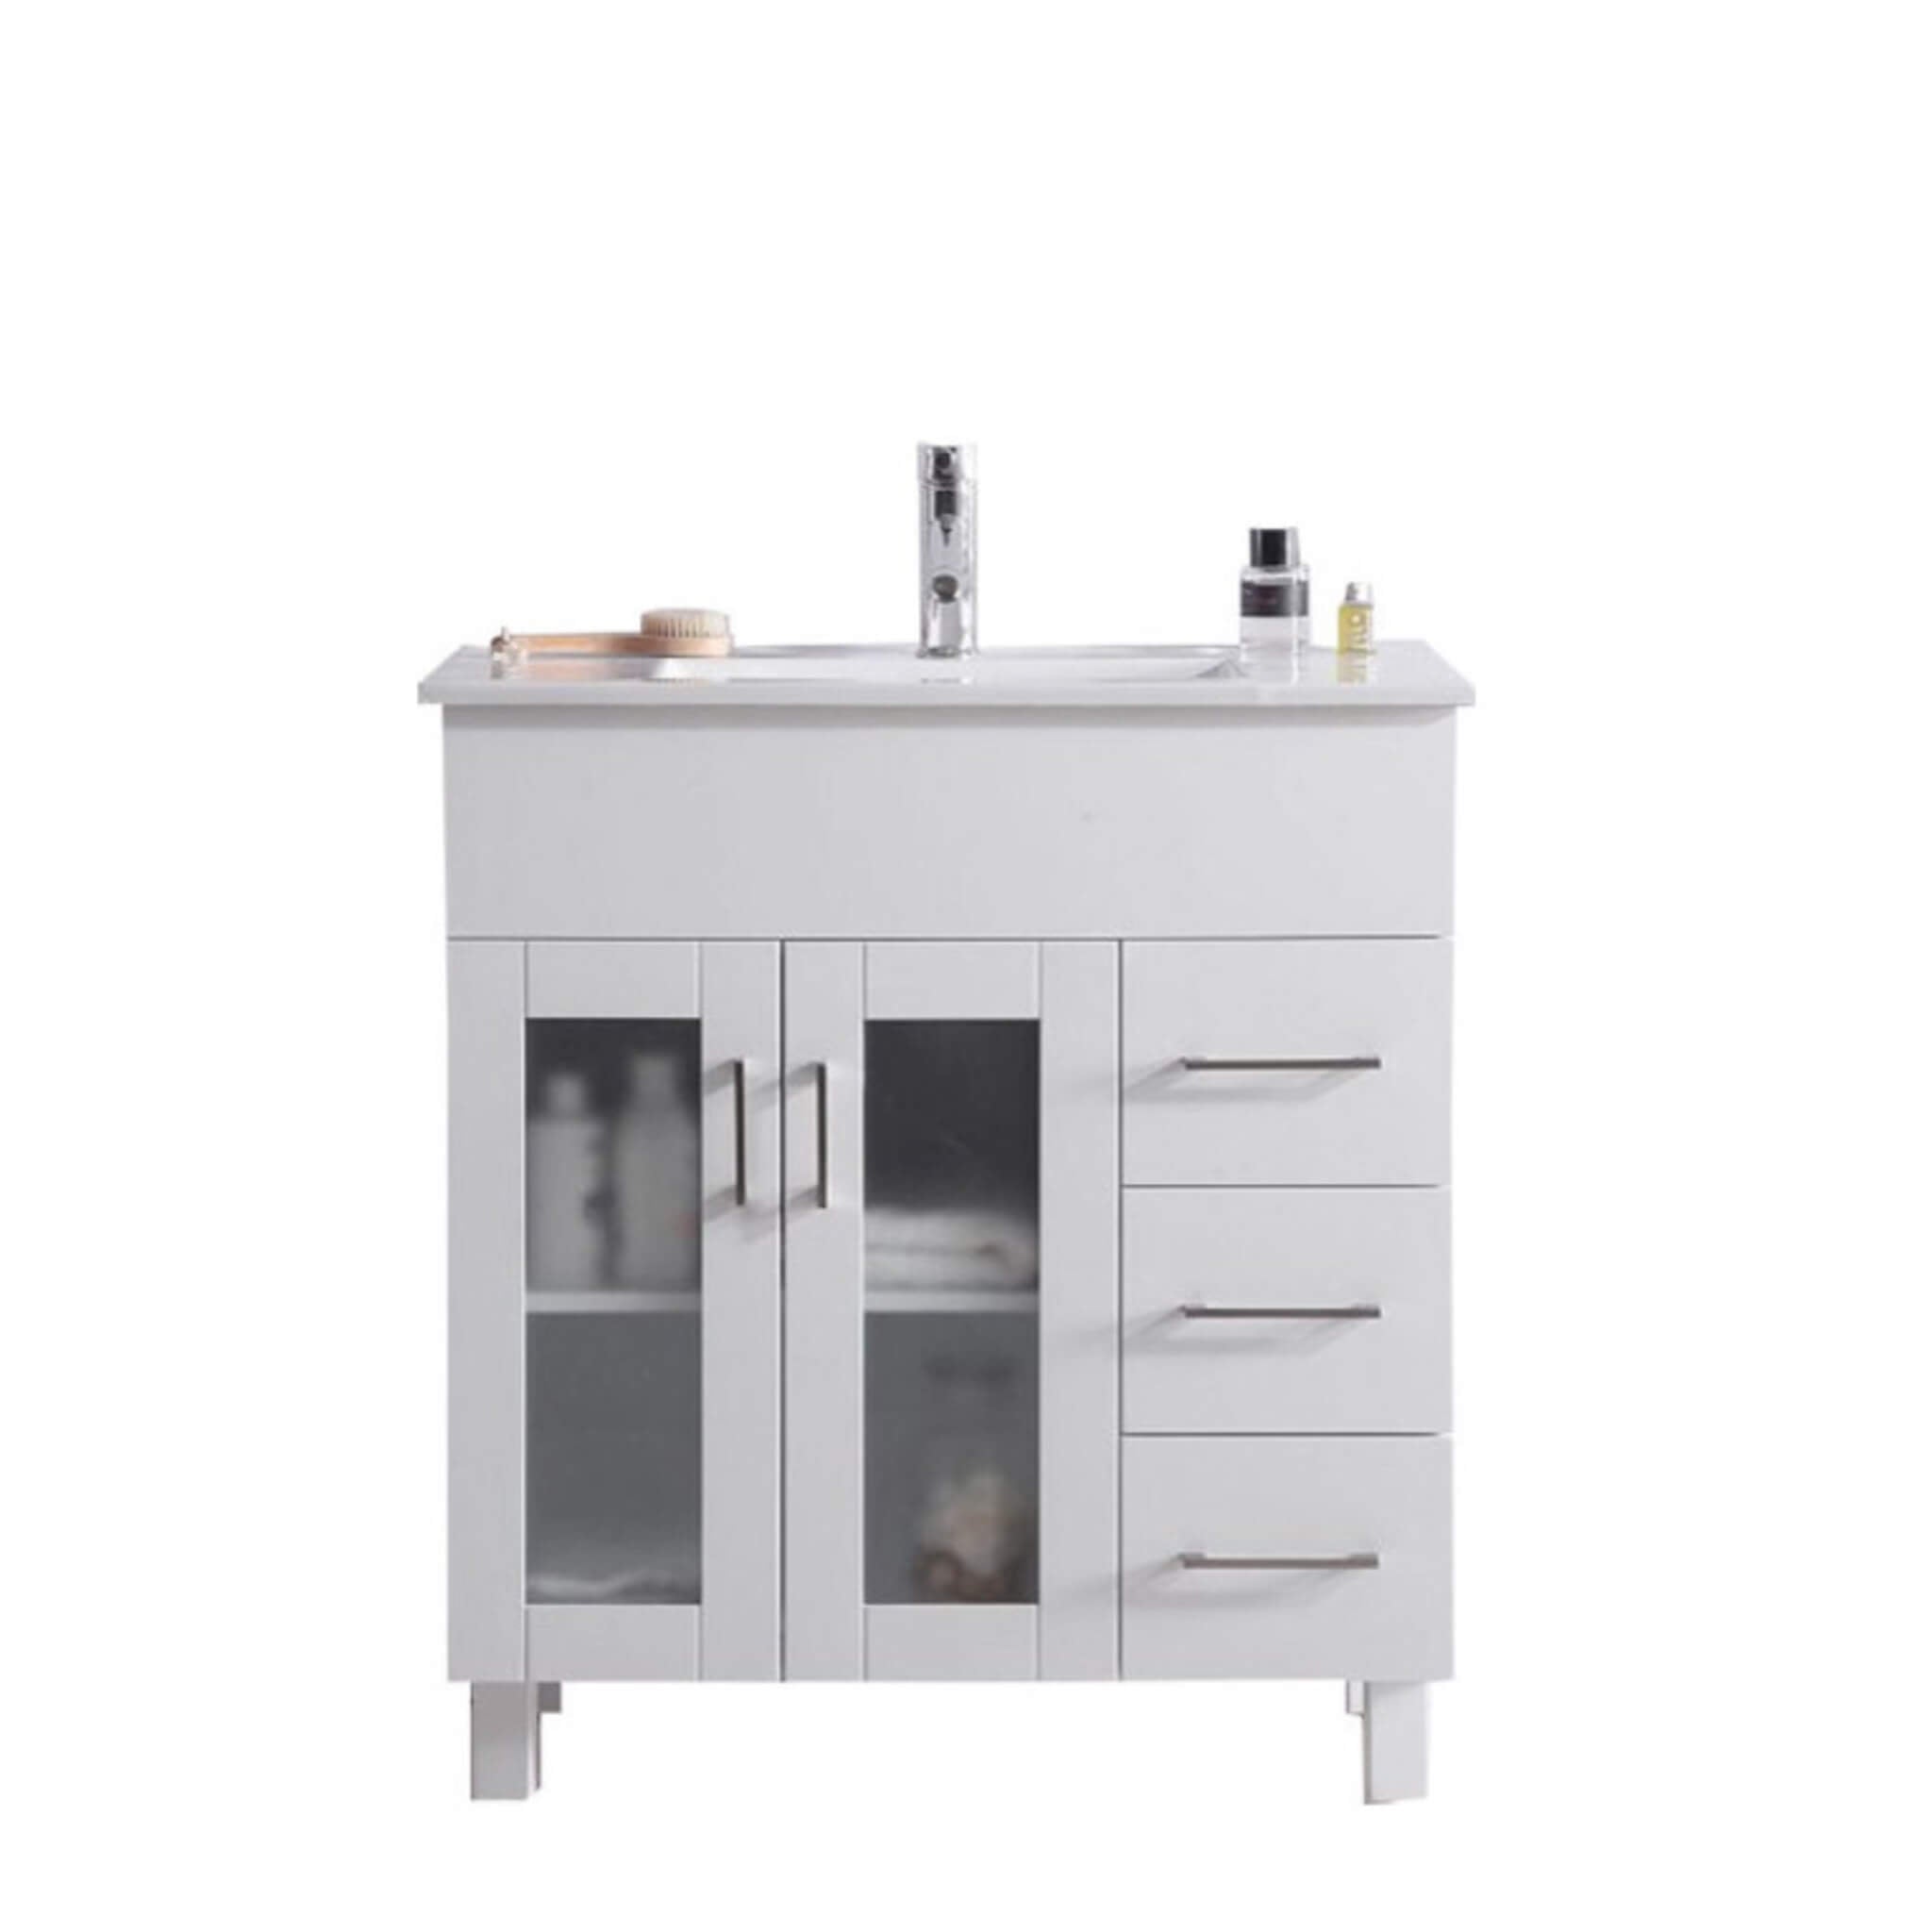 LAVIVA Nova 31321529-32W-CB 32" Single Bathroom Vanity in White with Ceramic Top and Integrated Sink, Front View